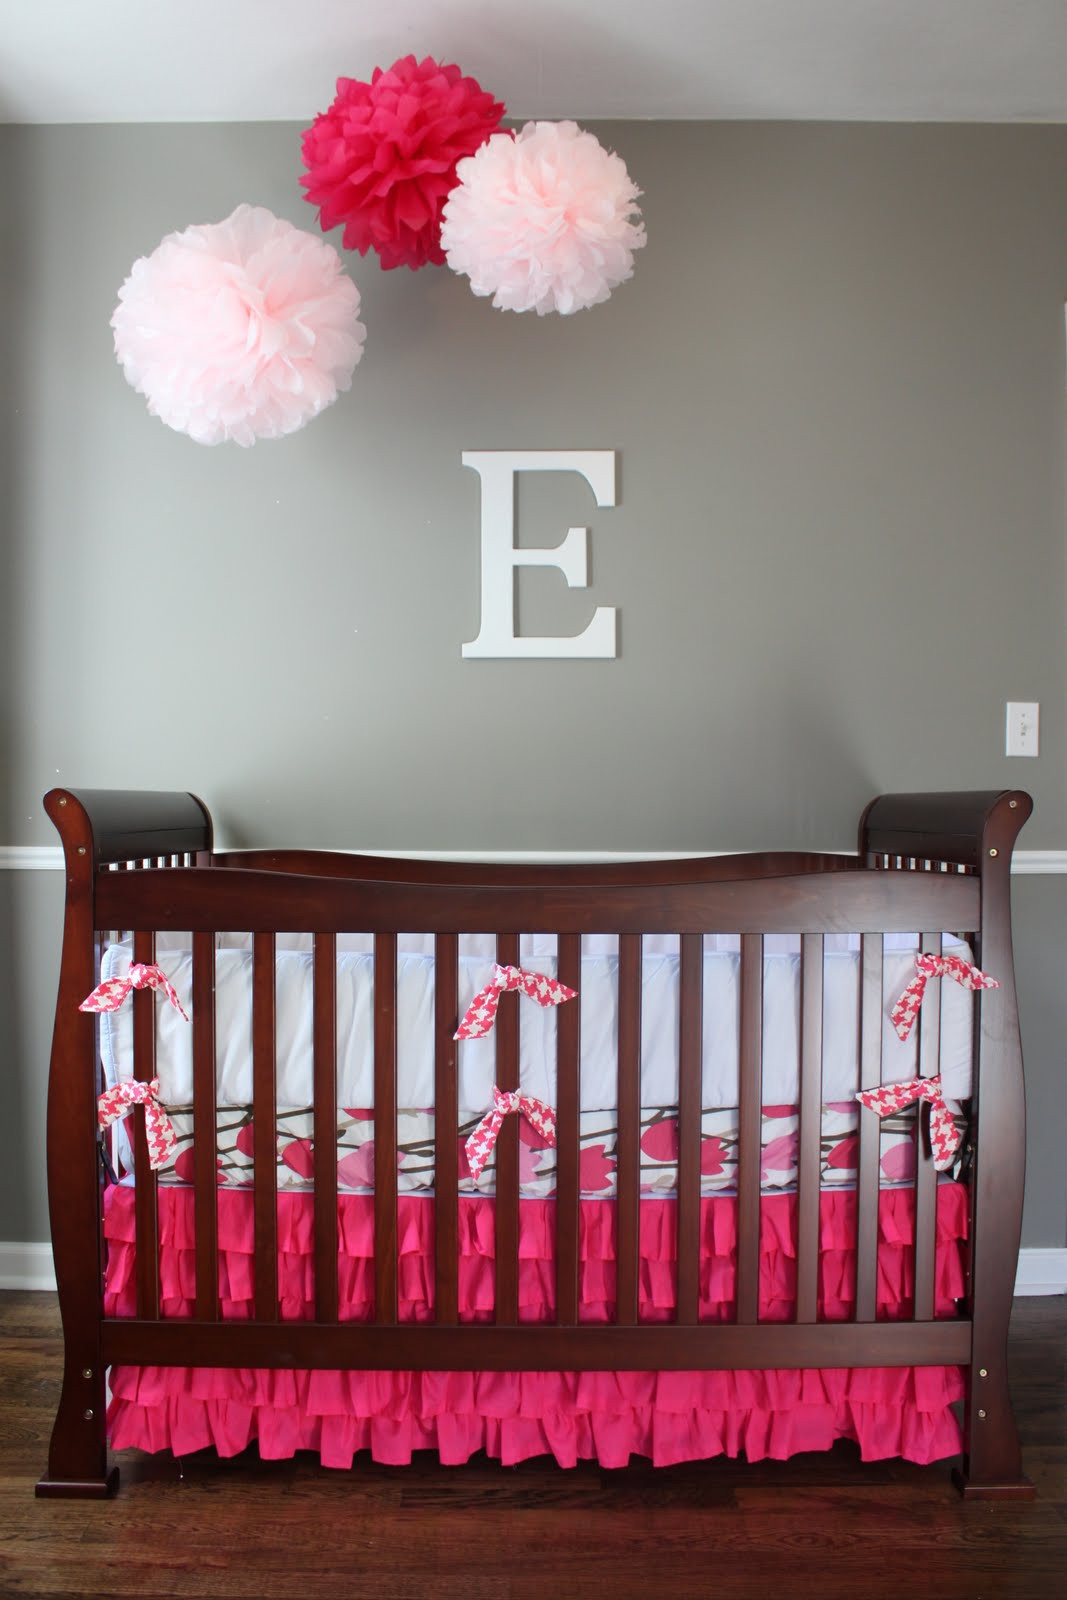 Baby Girl Nursery Decorating Ideas
 simple sage designs Check This Out Baby Girl Nursery